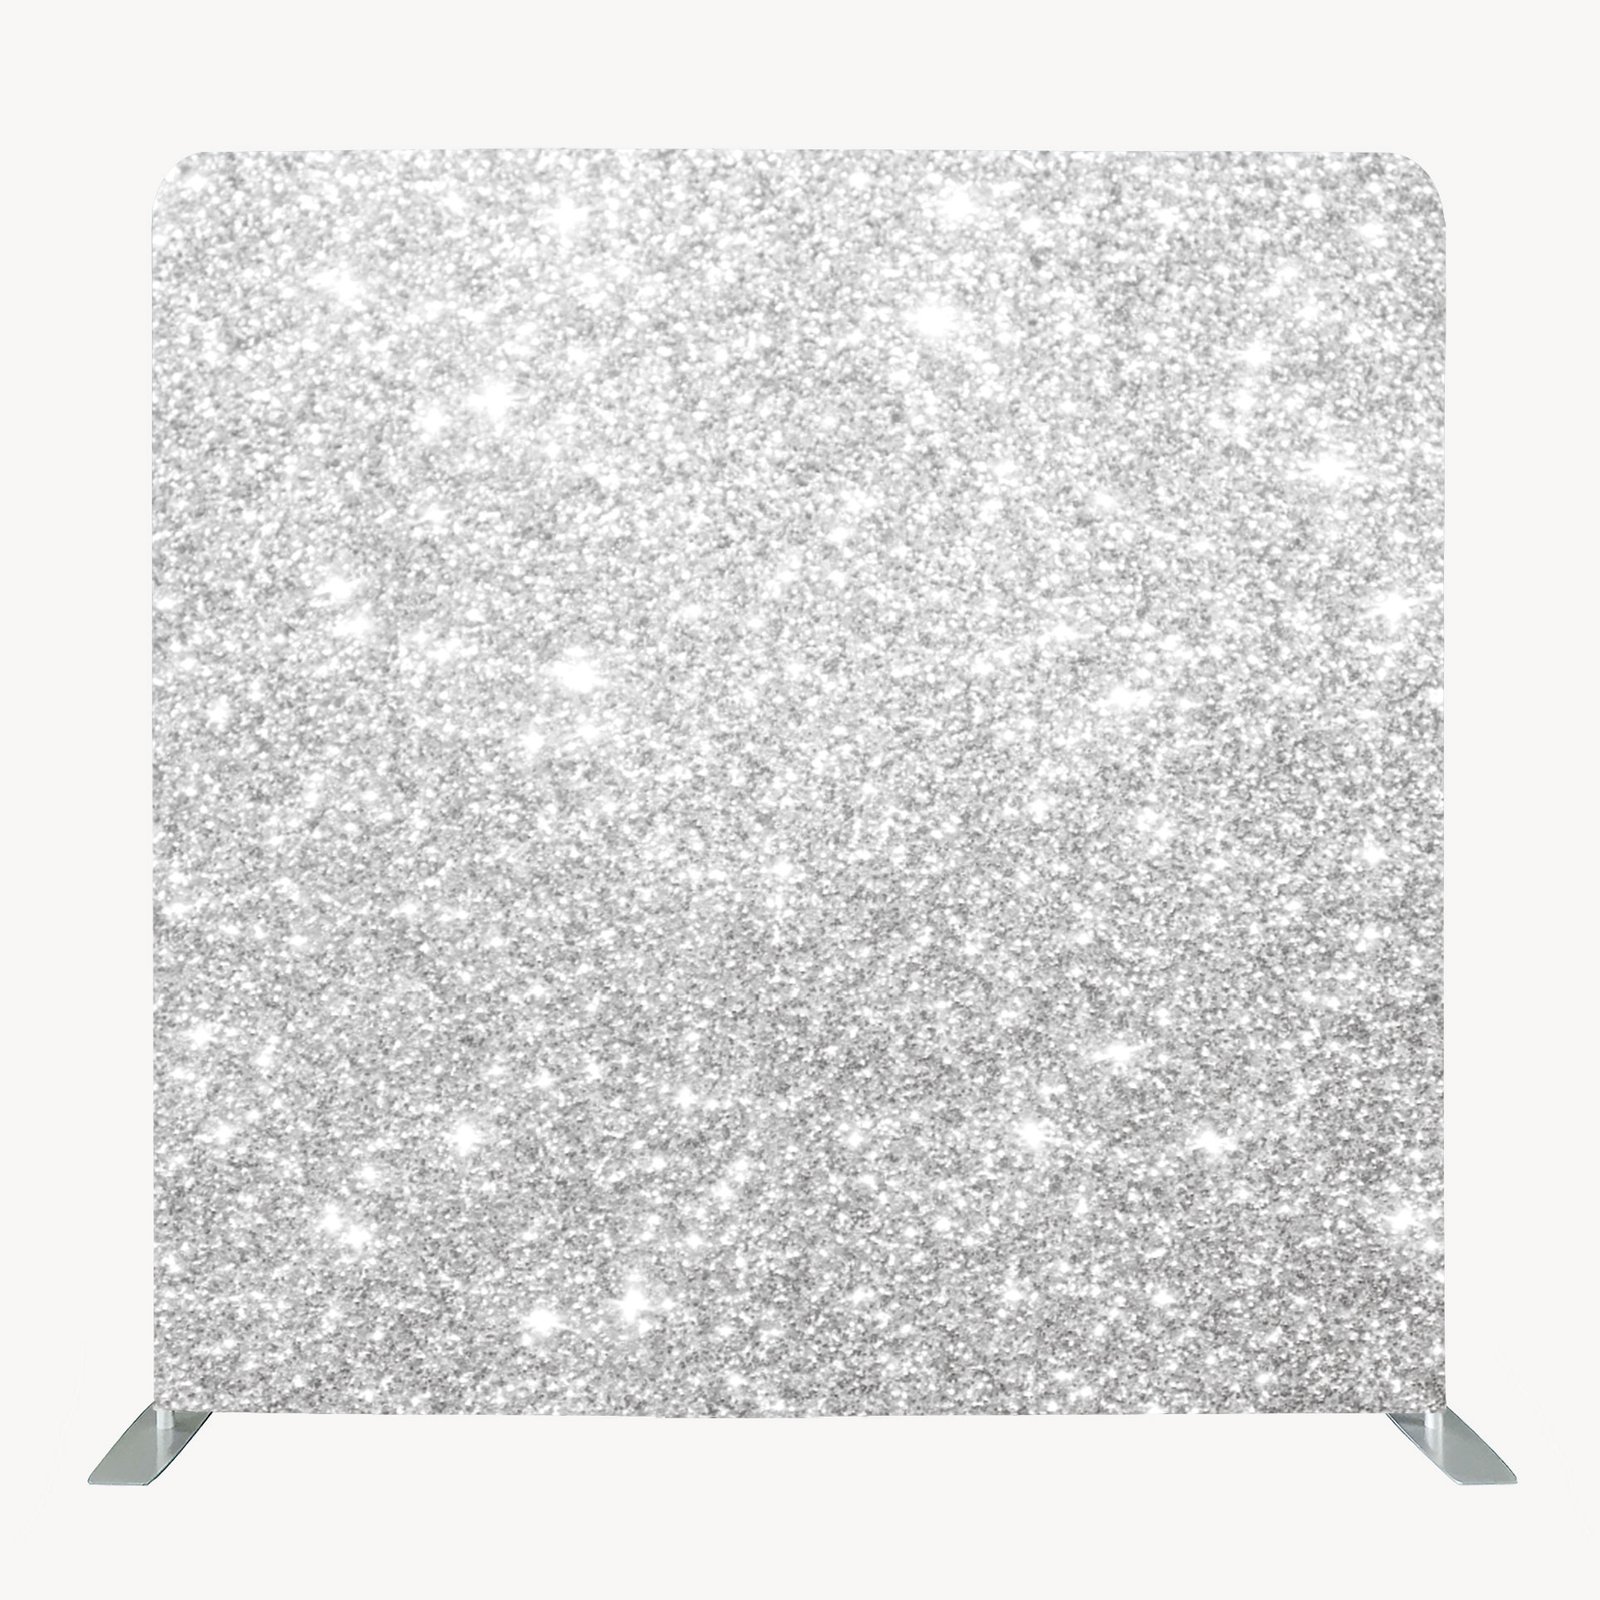 Backdrops - Silver Sparkles - Vancity Photo Booth